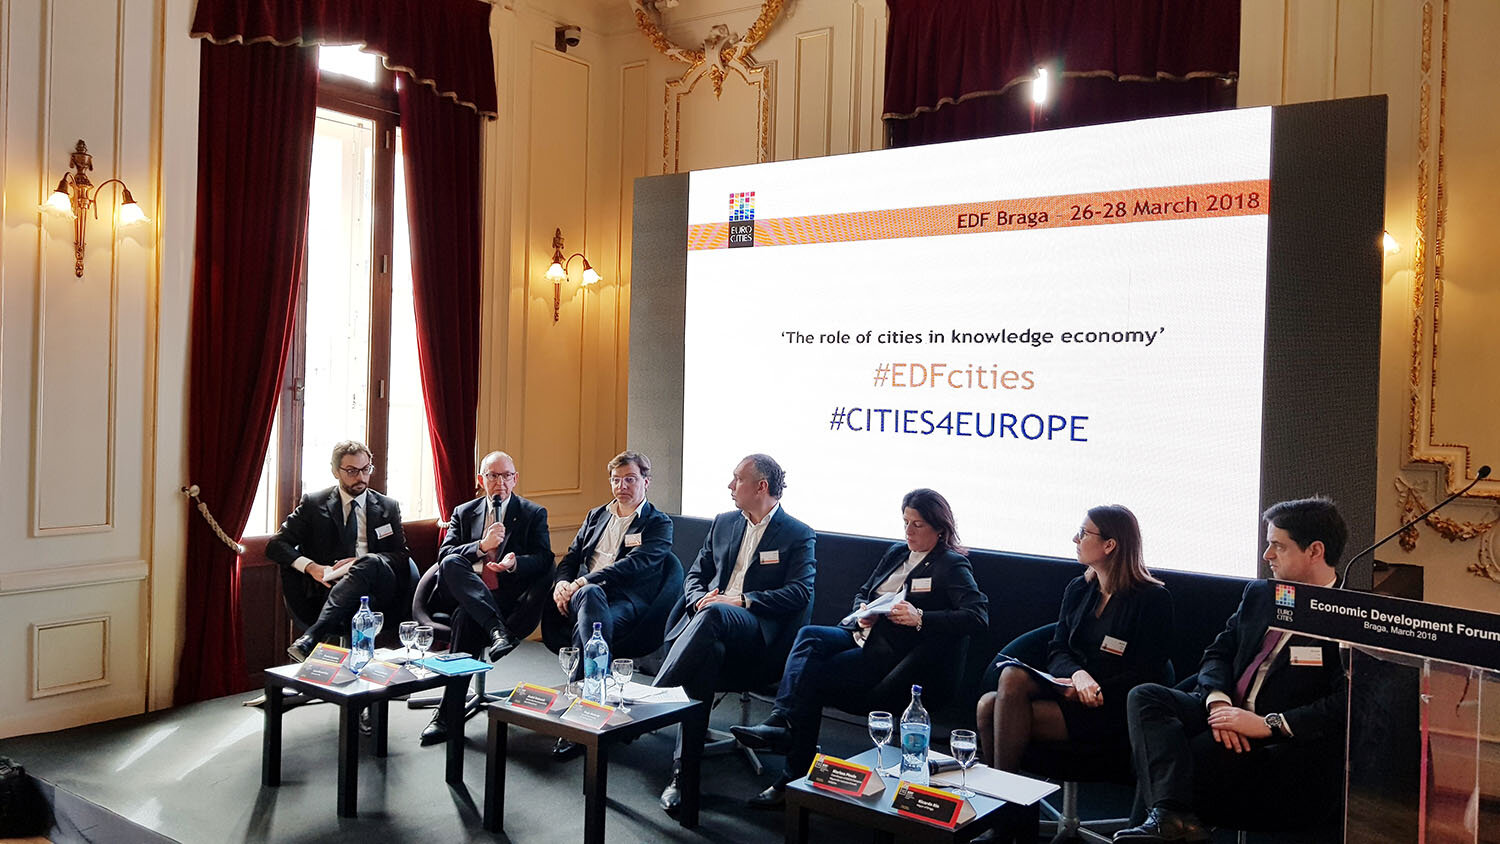 Eurocities Development Forum “The Role of Cities in Knowledge Economy”